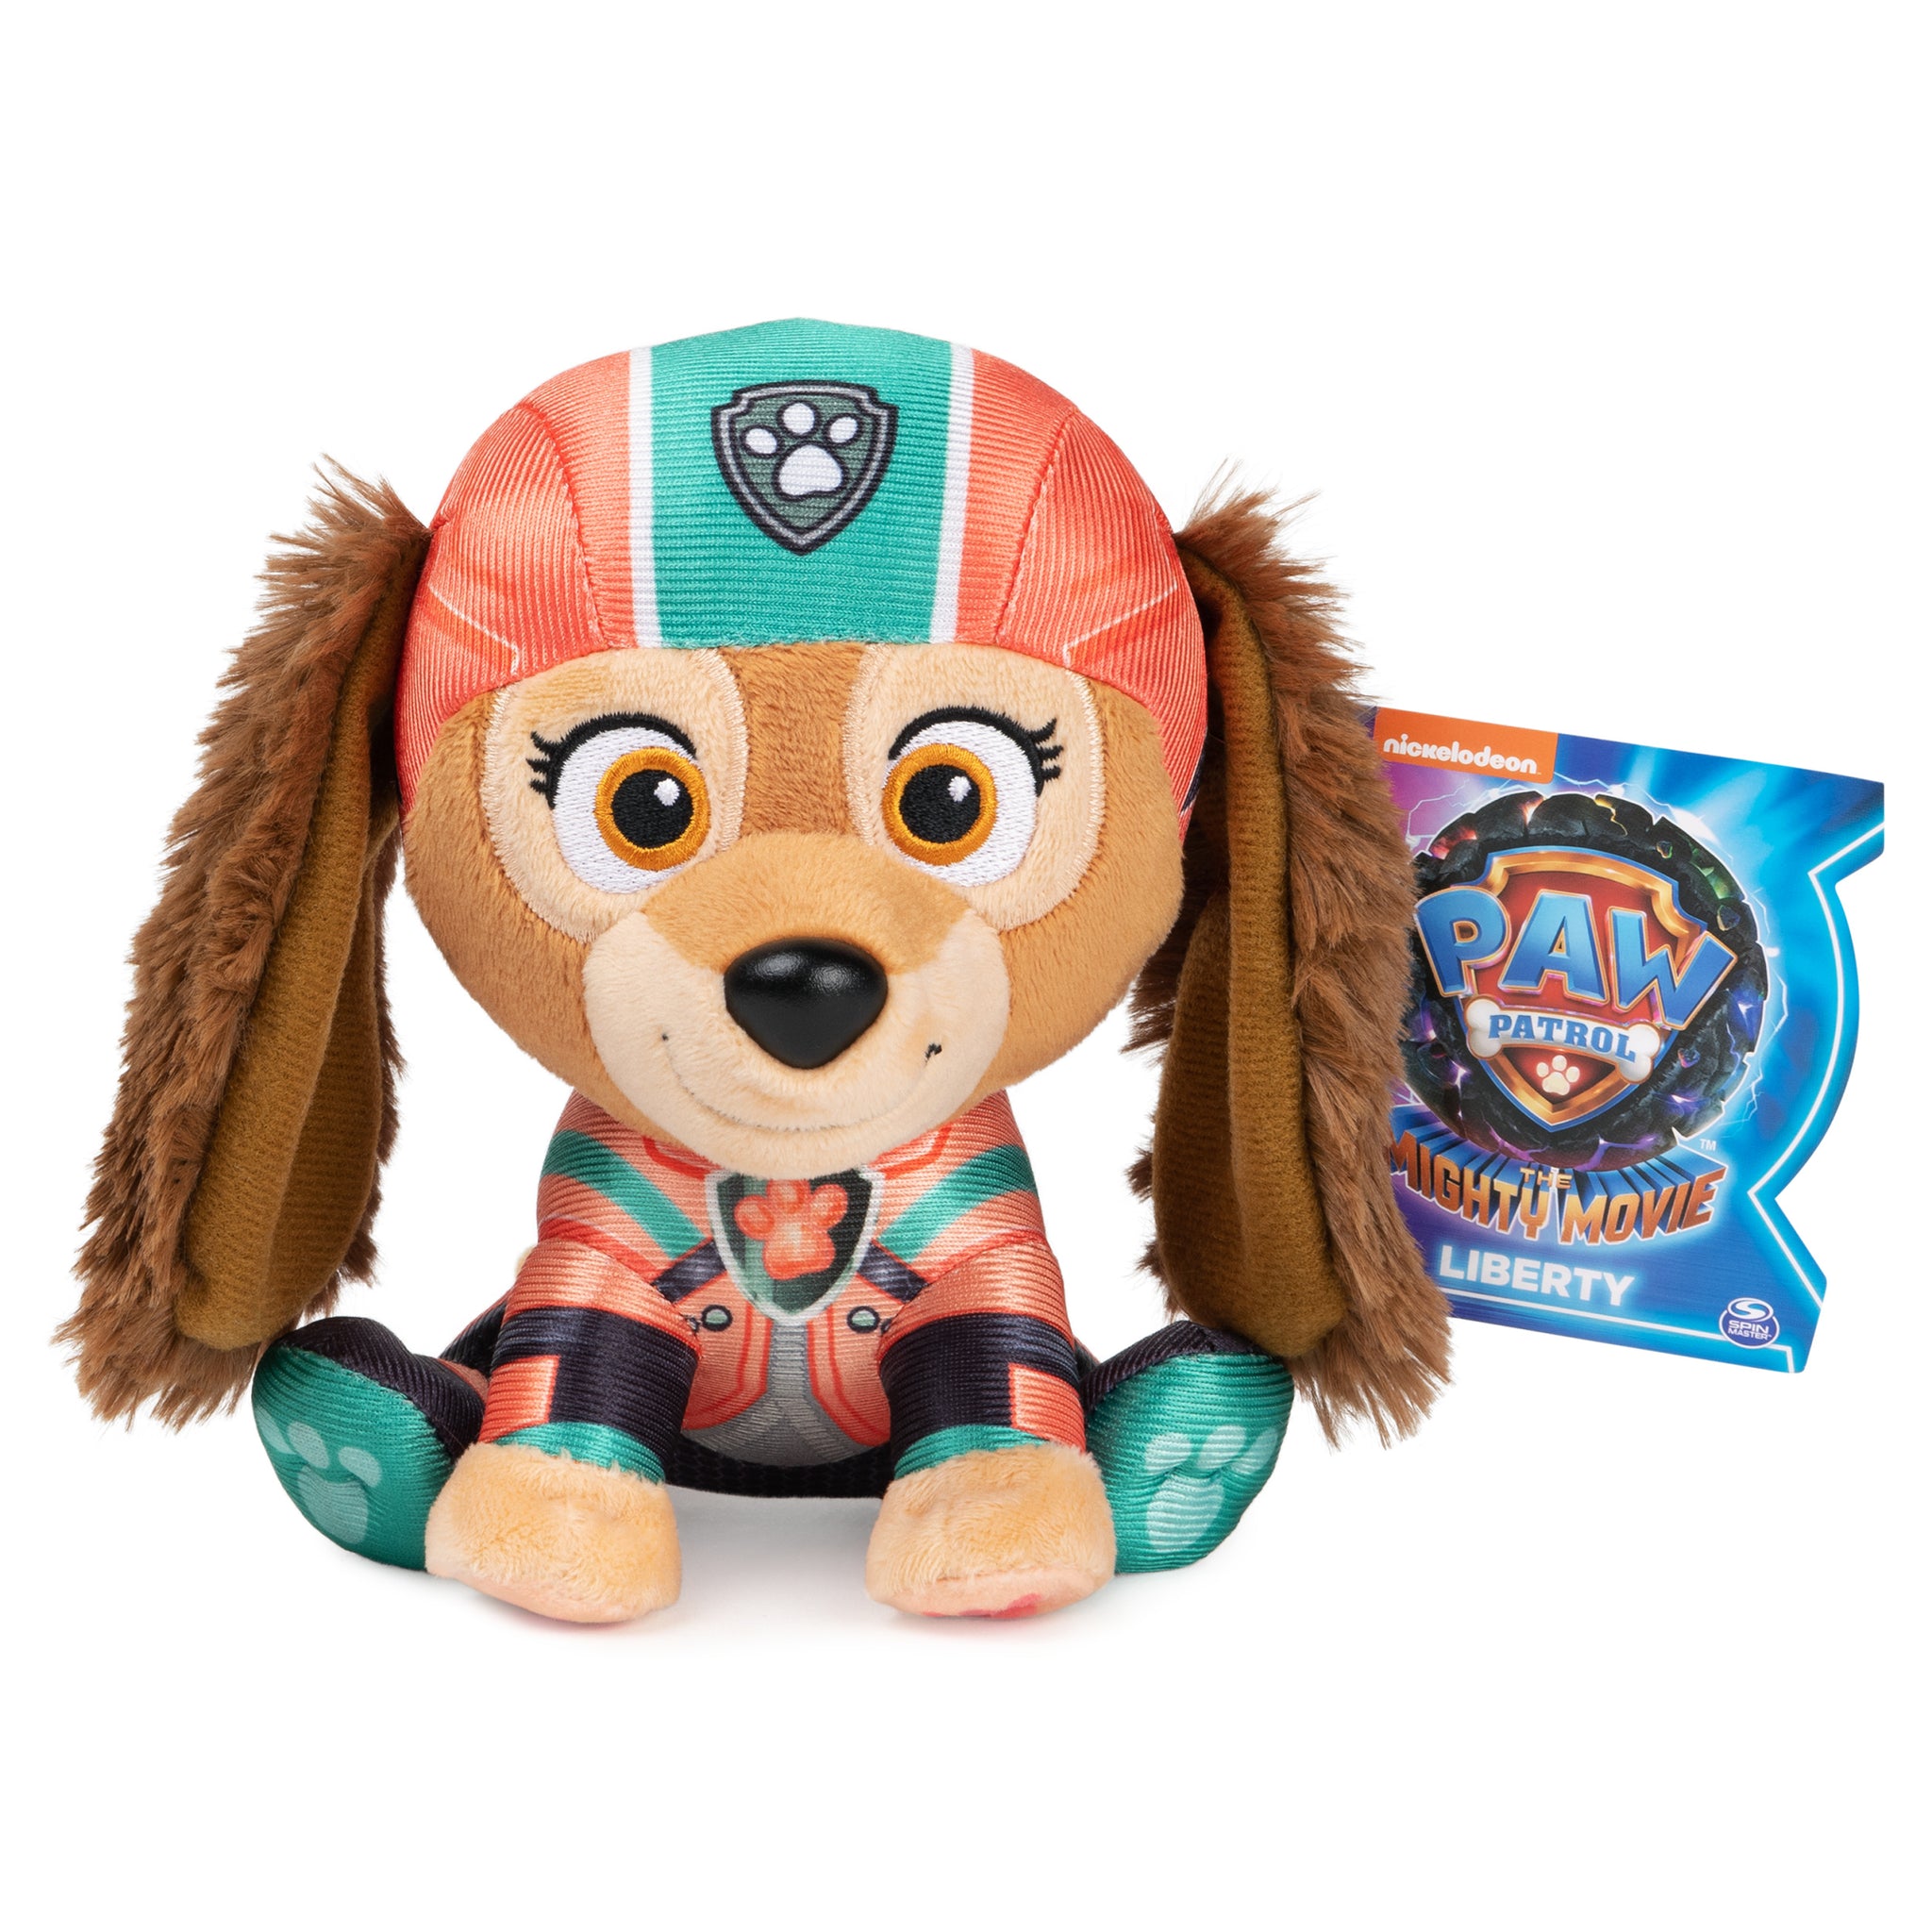 PAW Patrol: The Mighty Movie Liberty, 6 in - Gund